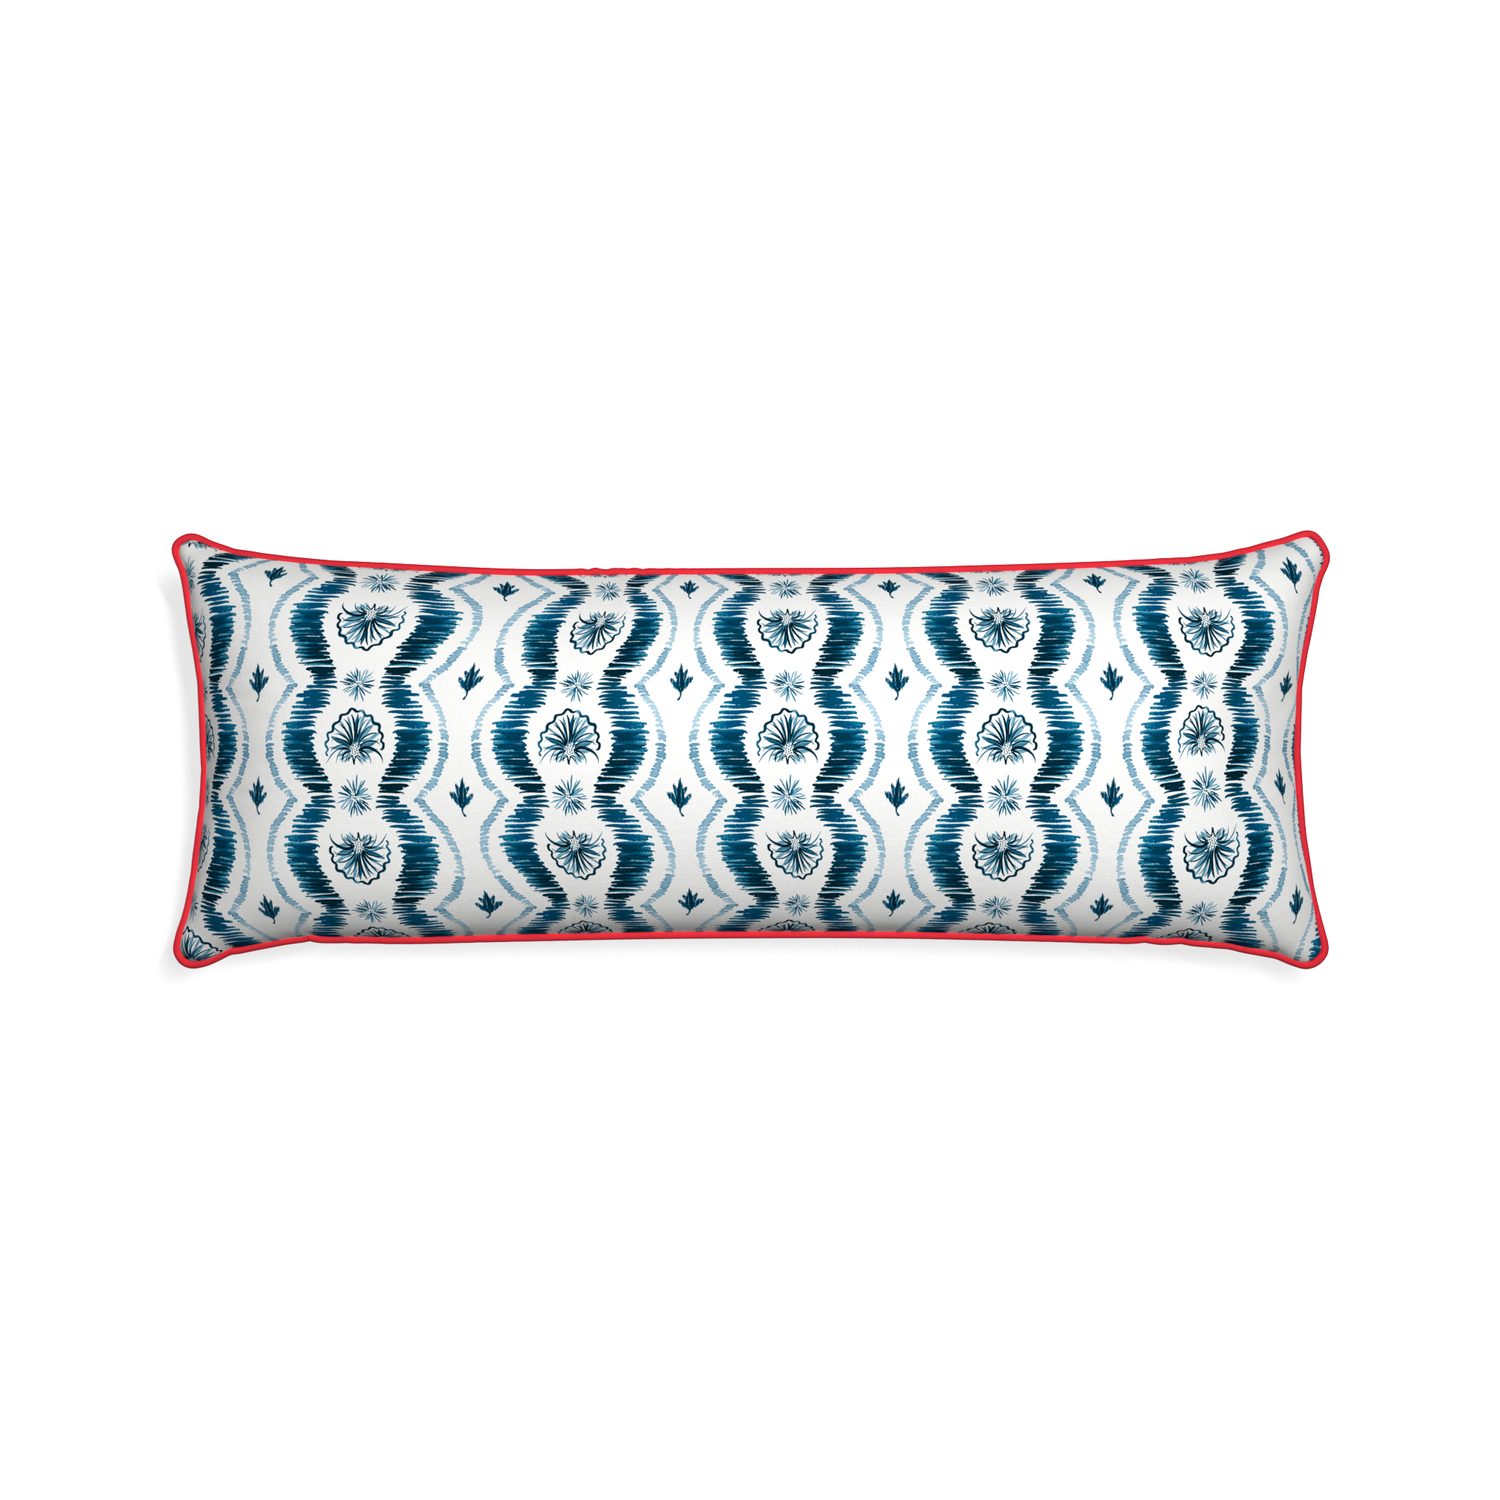 Xl-lumbar alice custom pillow with cherry piping on white background